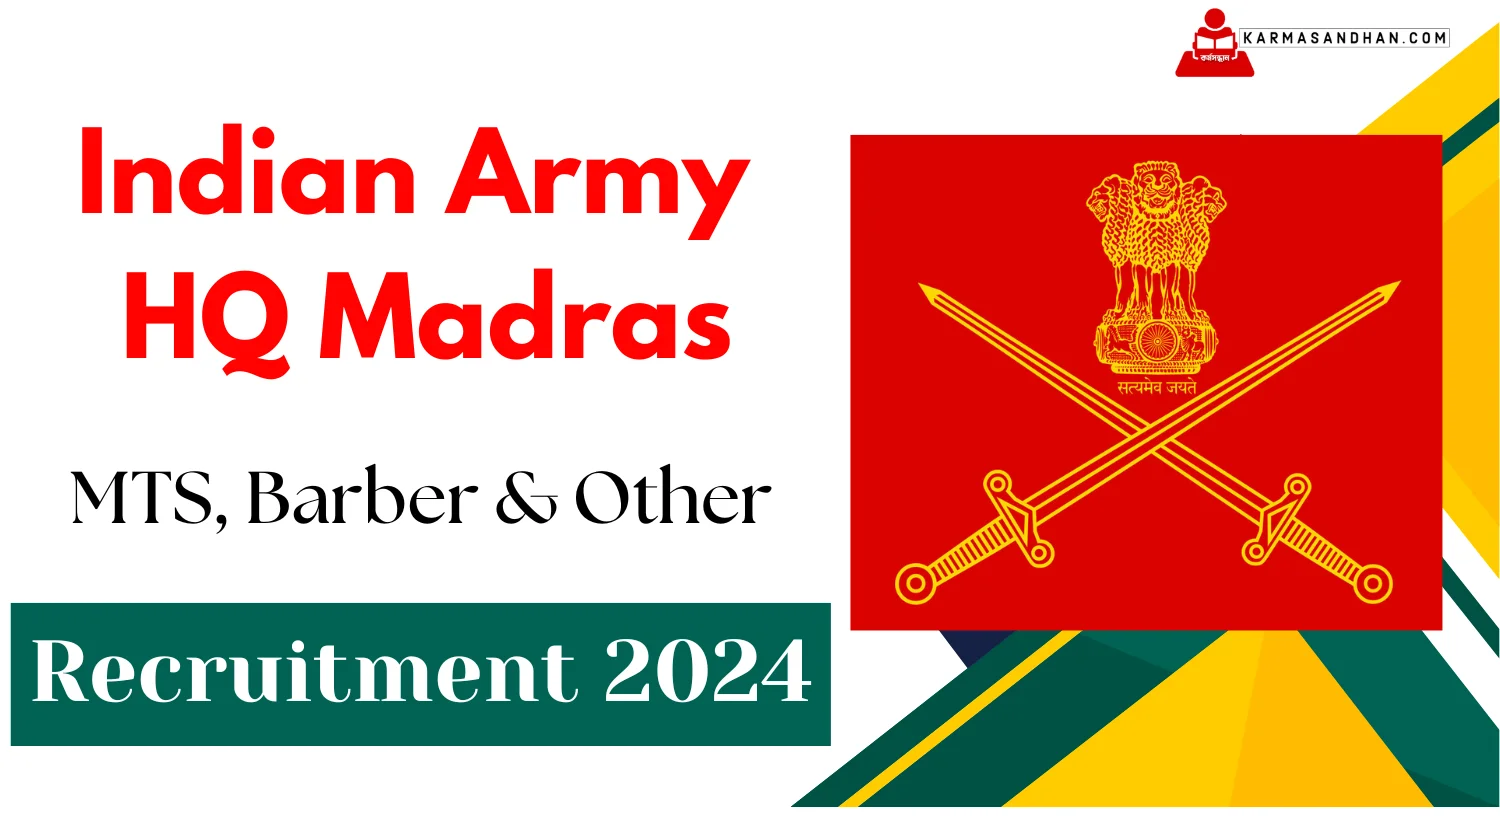 Indian Army HQ Madras Recruitment 2024, for MTS, Barber & Other Posts